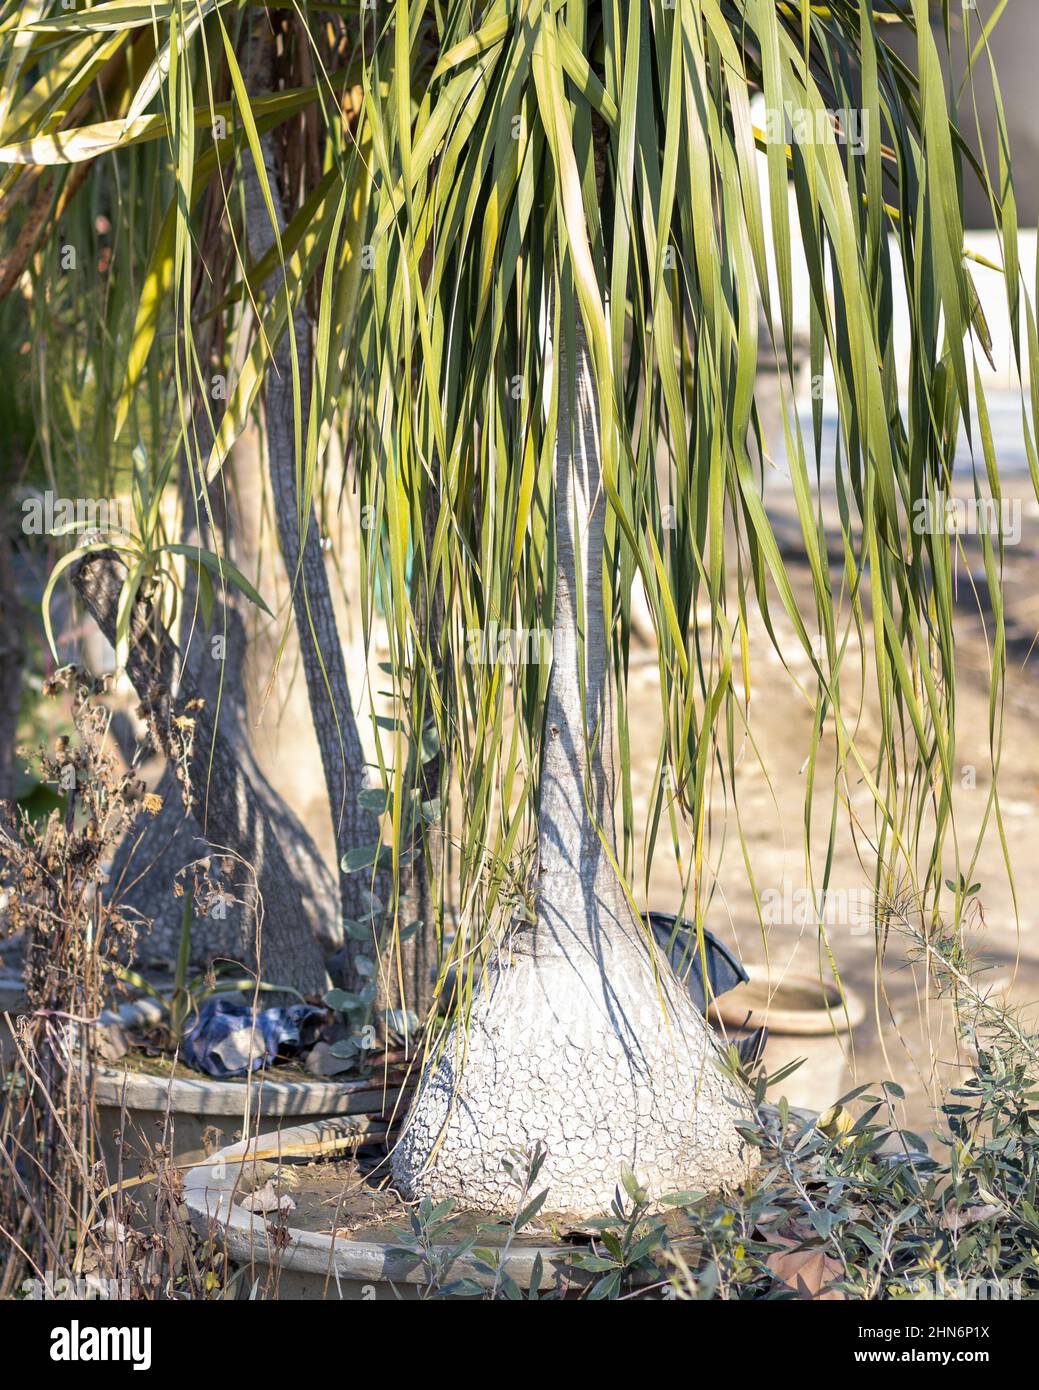 Big ponytail palm in a large pot Stock Photo